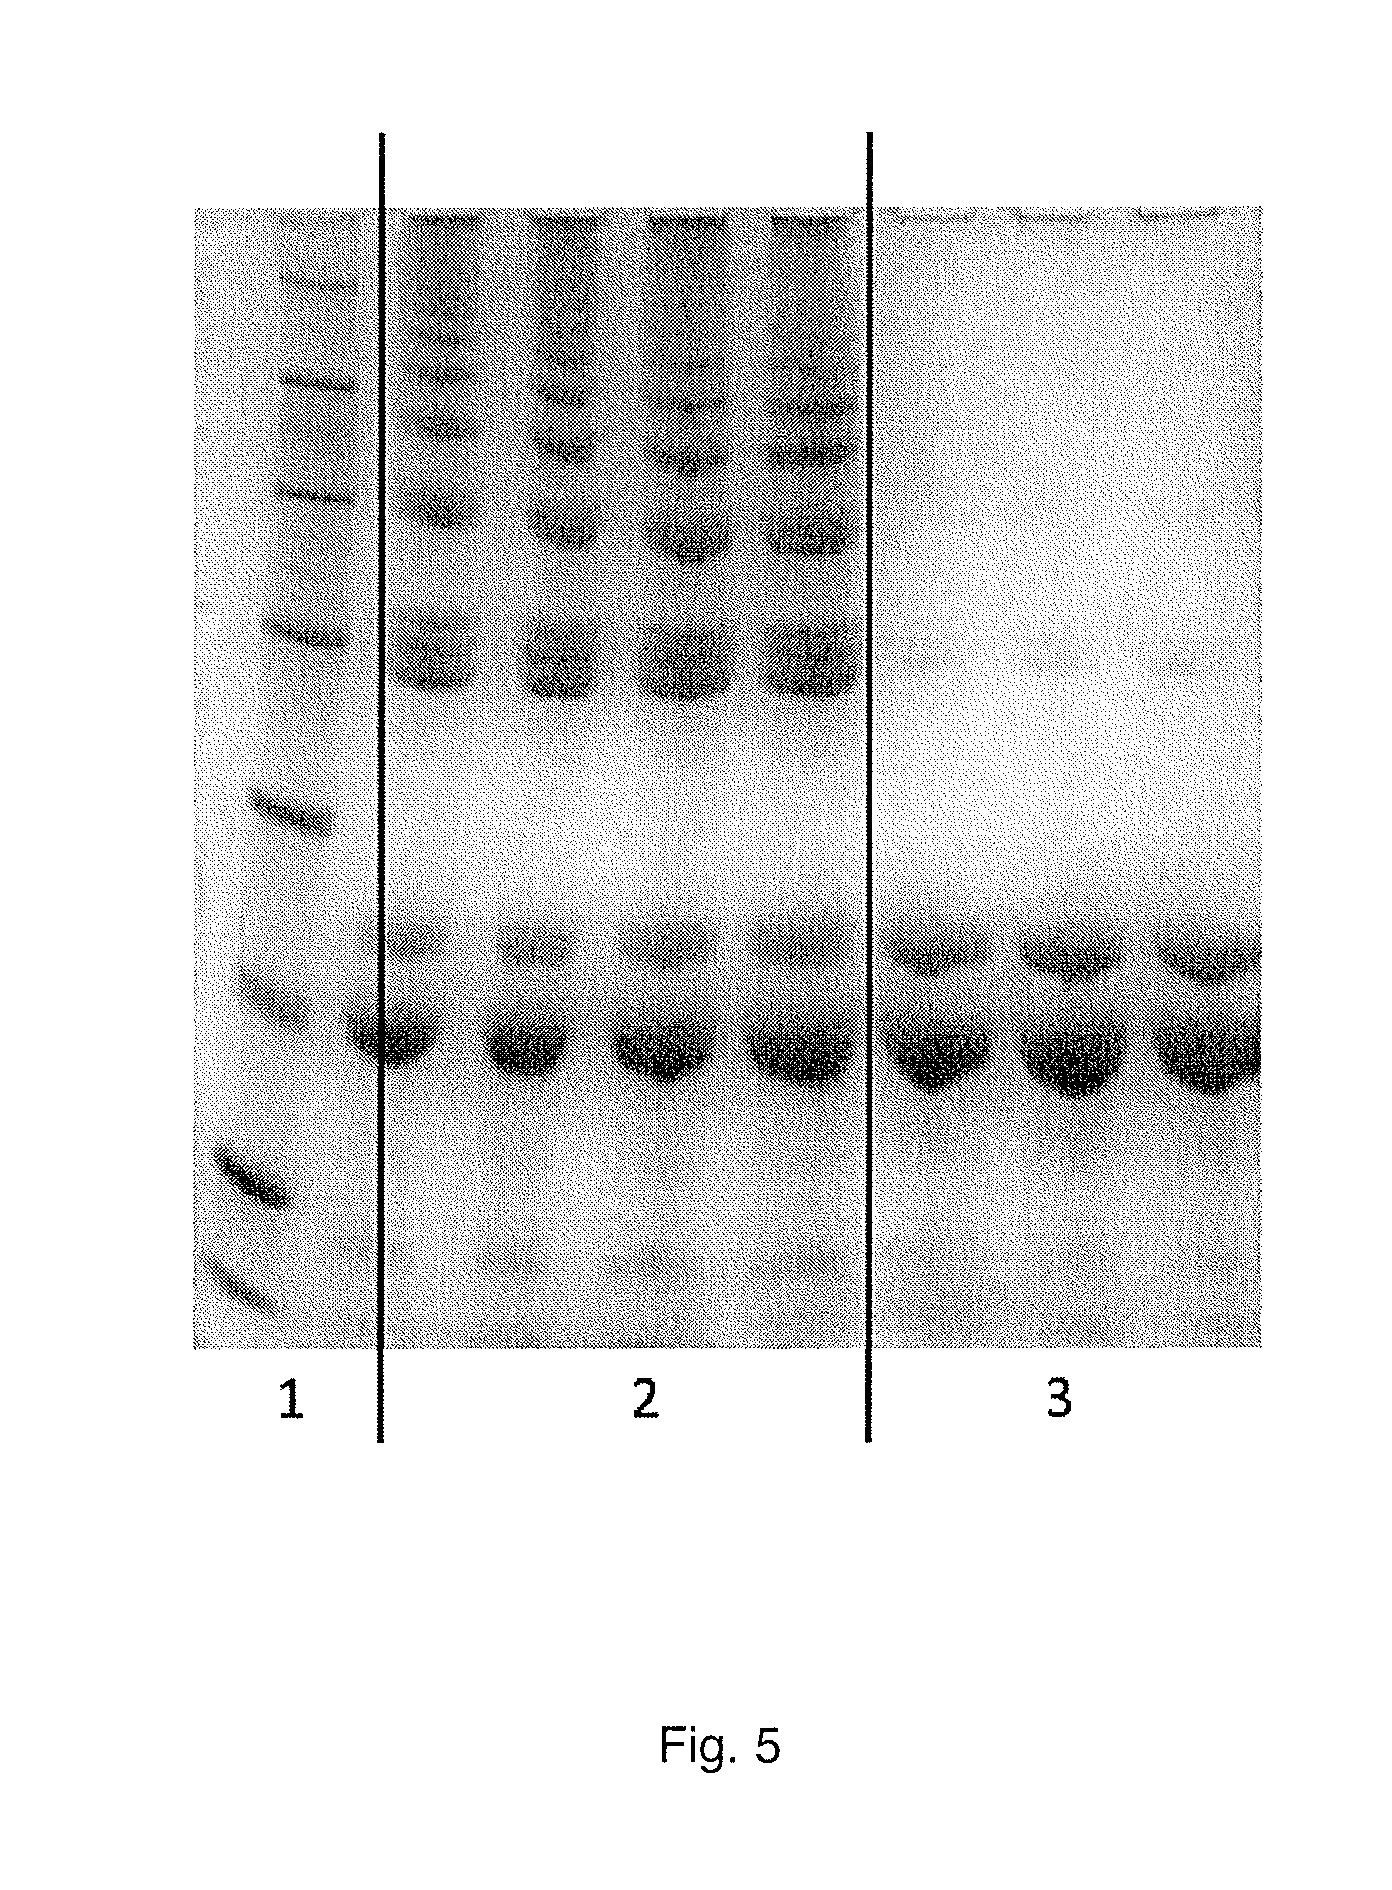 Method for the production of maize proteins and use of said proteins for the production of gluten-free bakery products and pasta